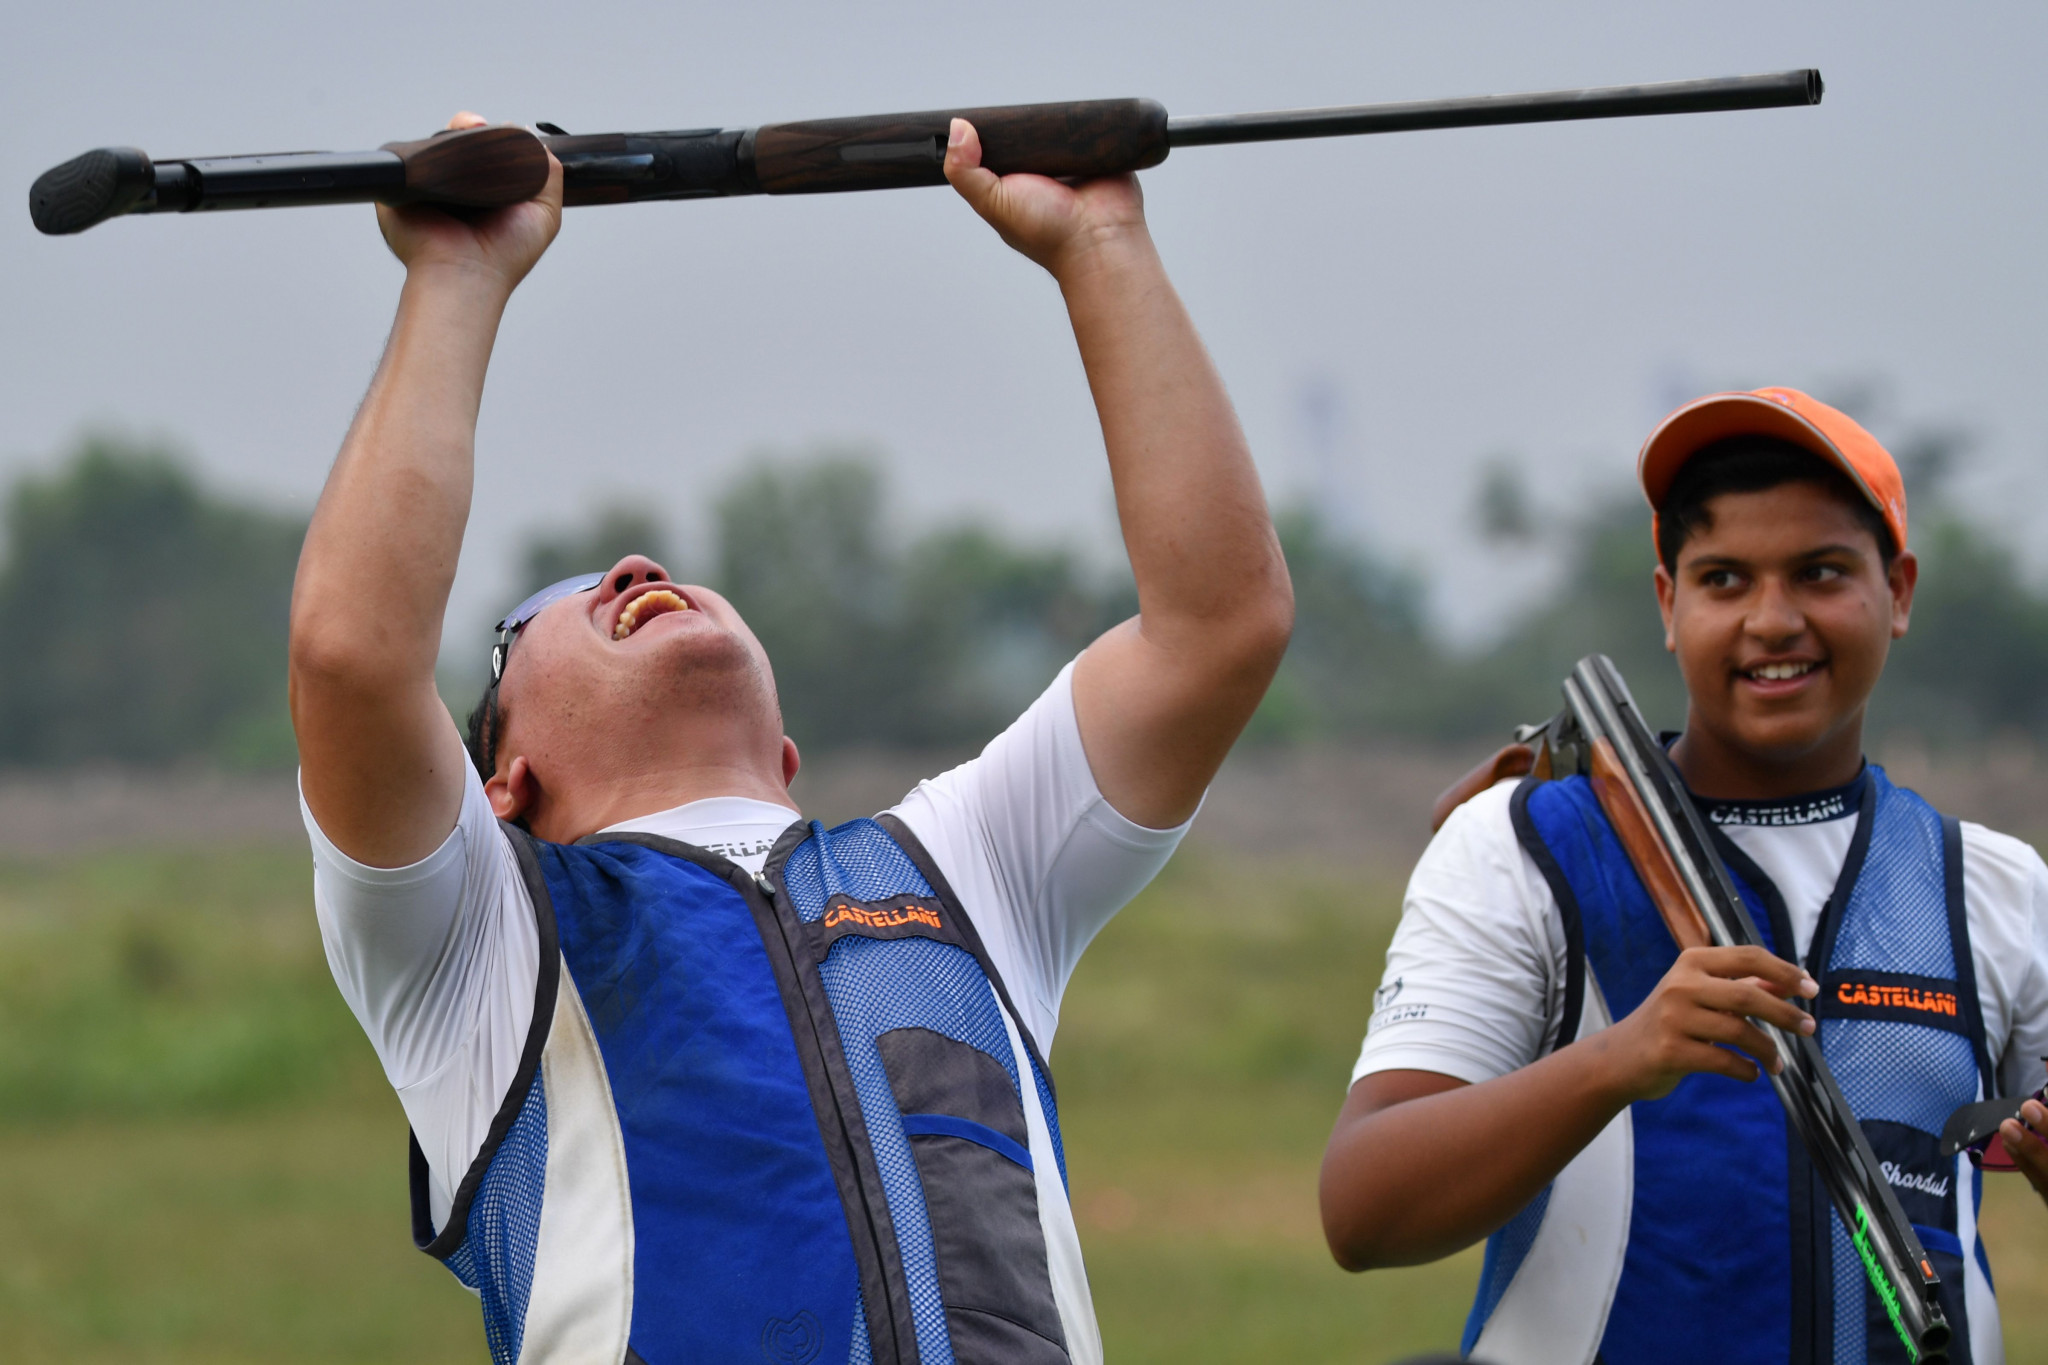 South Korea's Hyunwoo Shin reacts with delight after winning the men's double trap final ©Getty Images